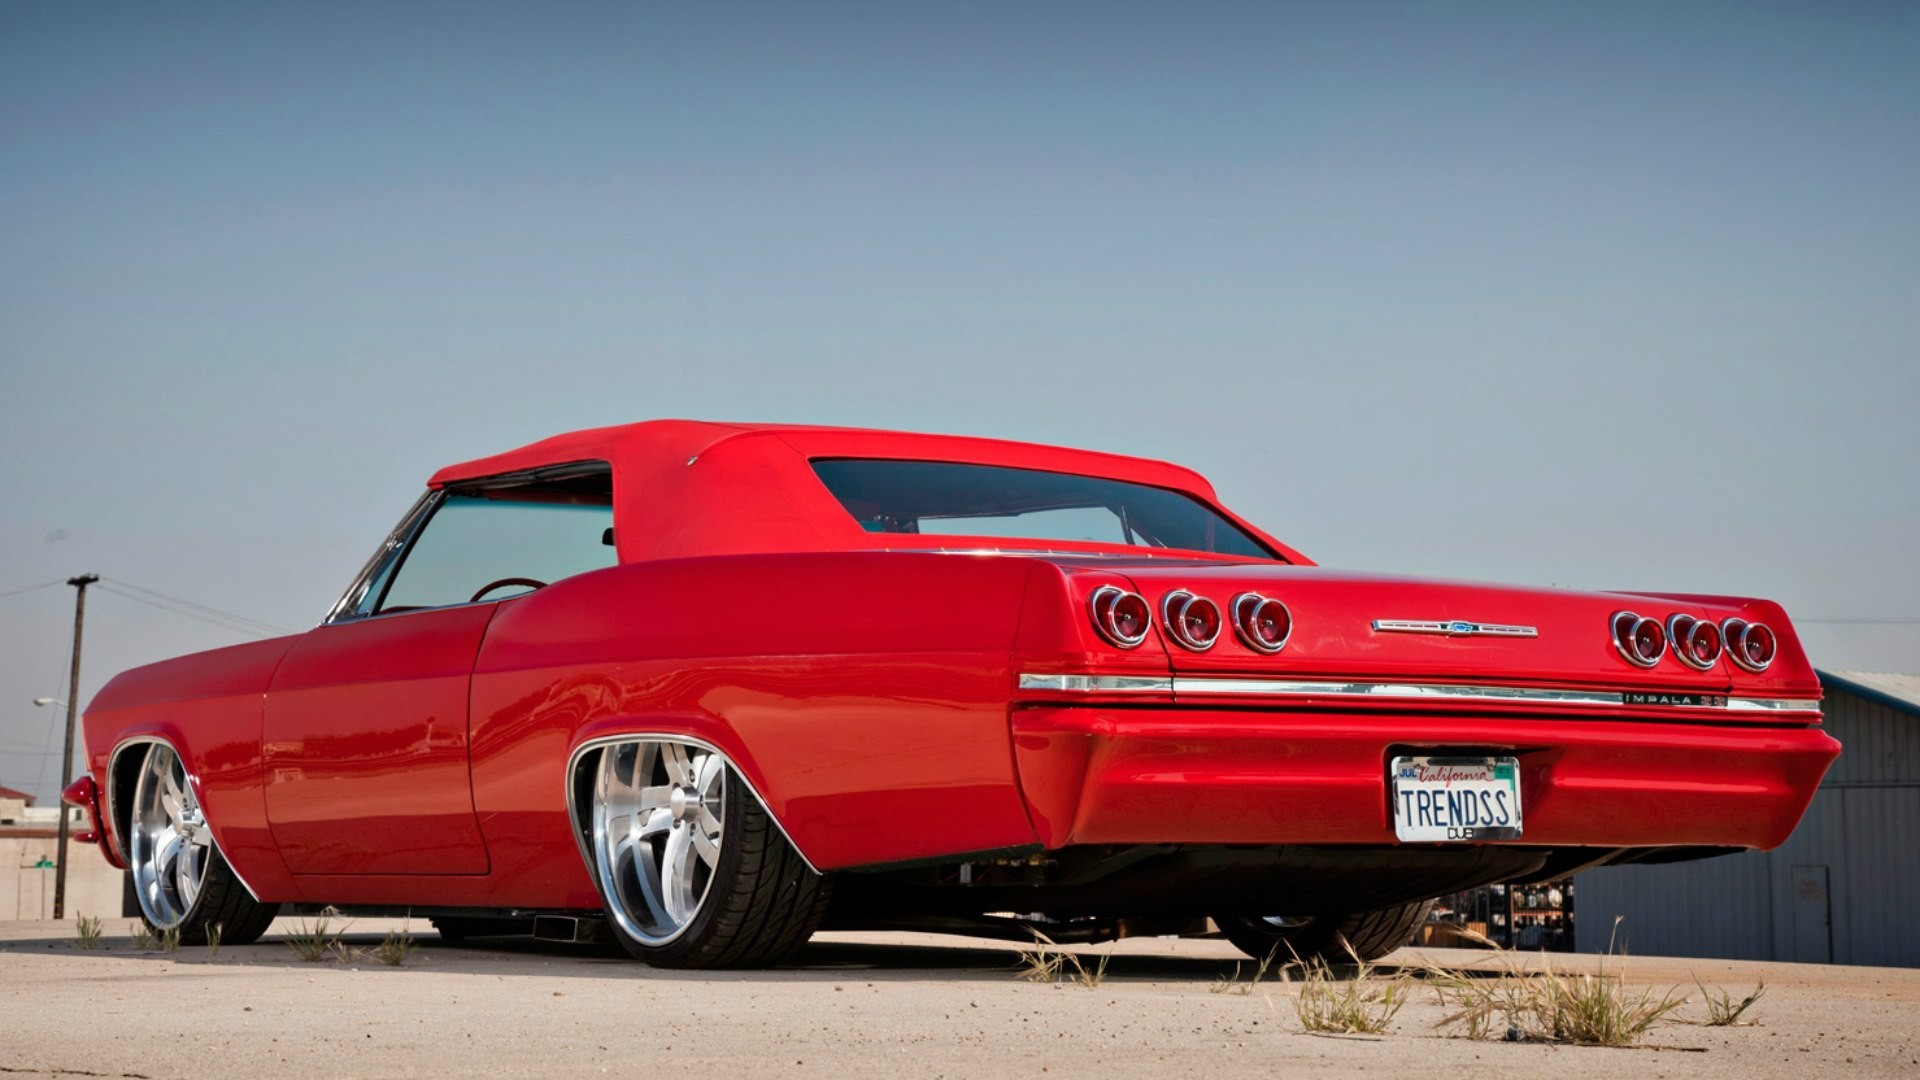 General 1920x1080 car tuning red cars vehicle Chevrolet Chevrolet Impala American cars